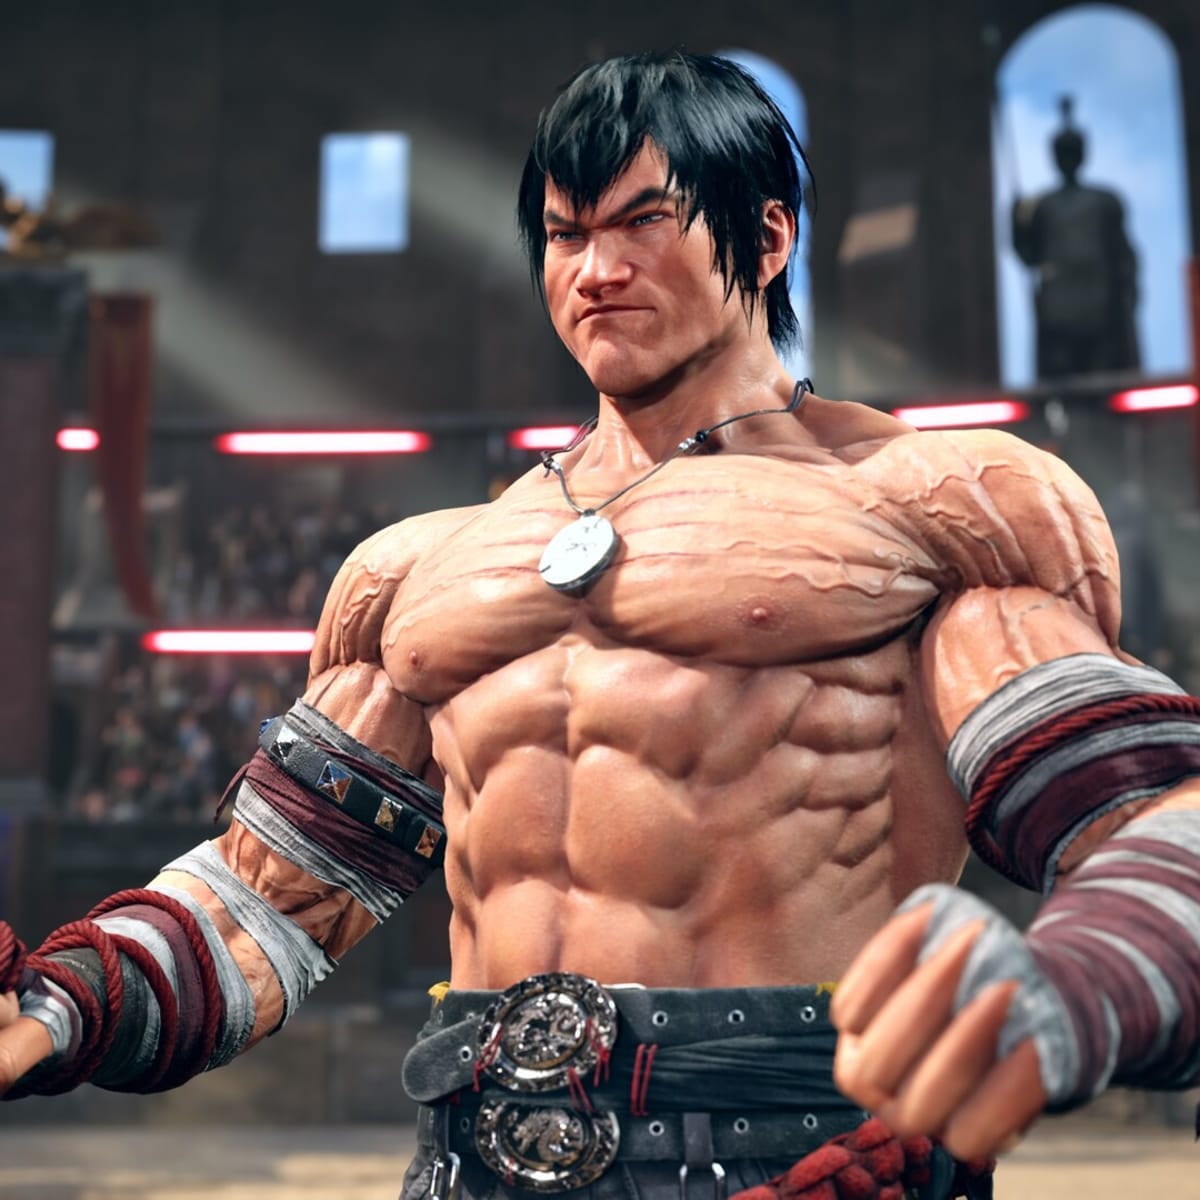 How to download Tekken 8: PlayStation, Xbox, and PC